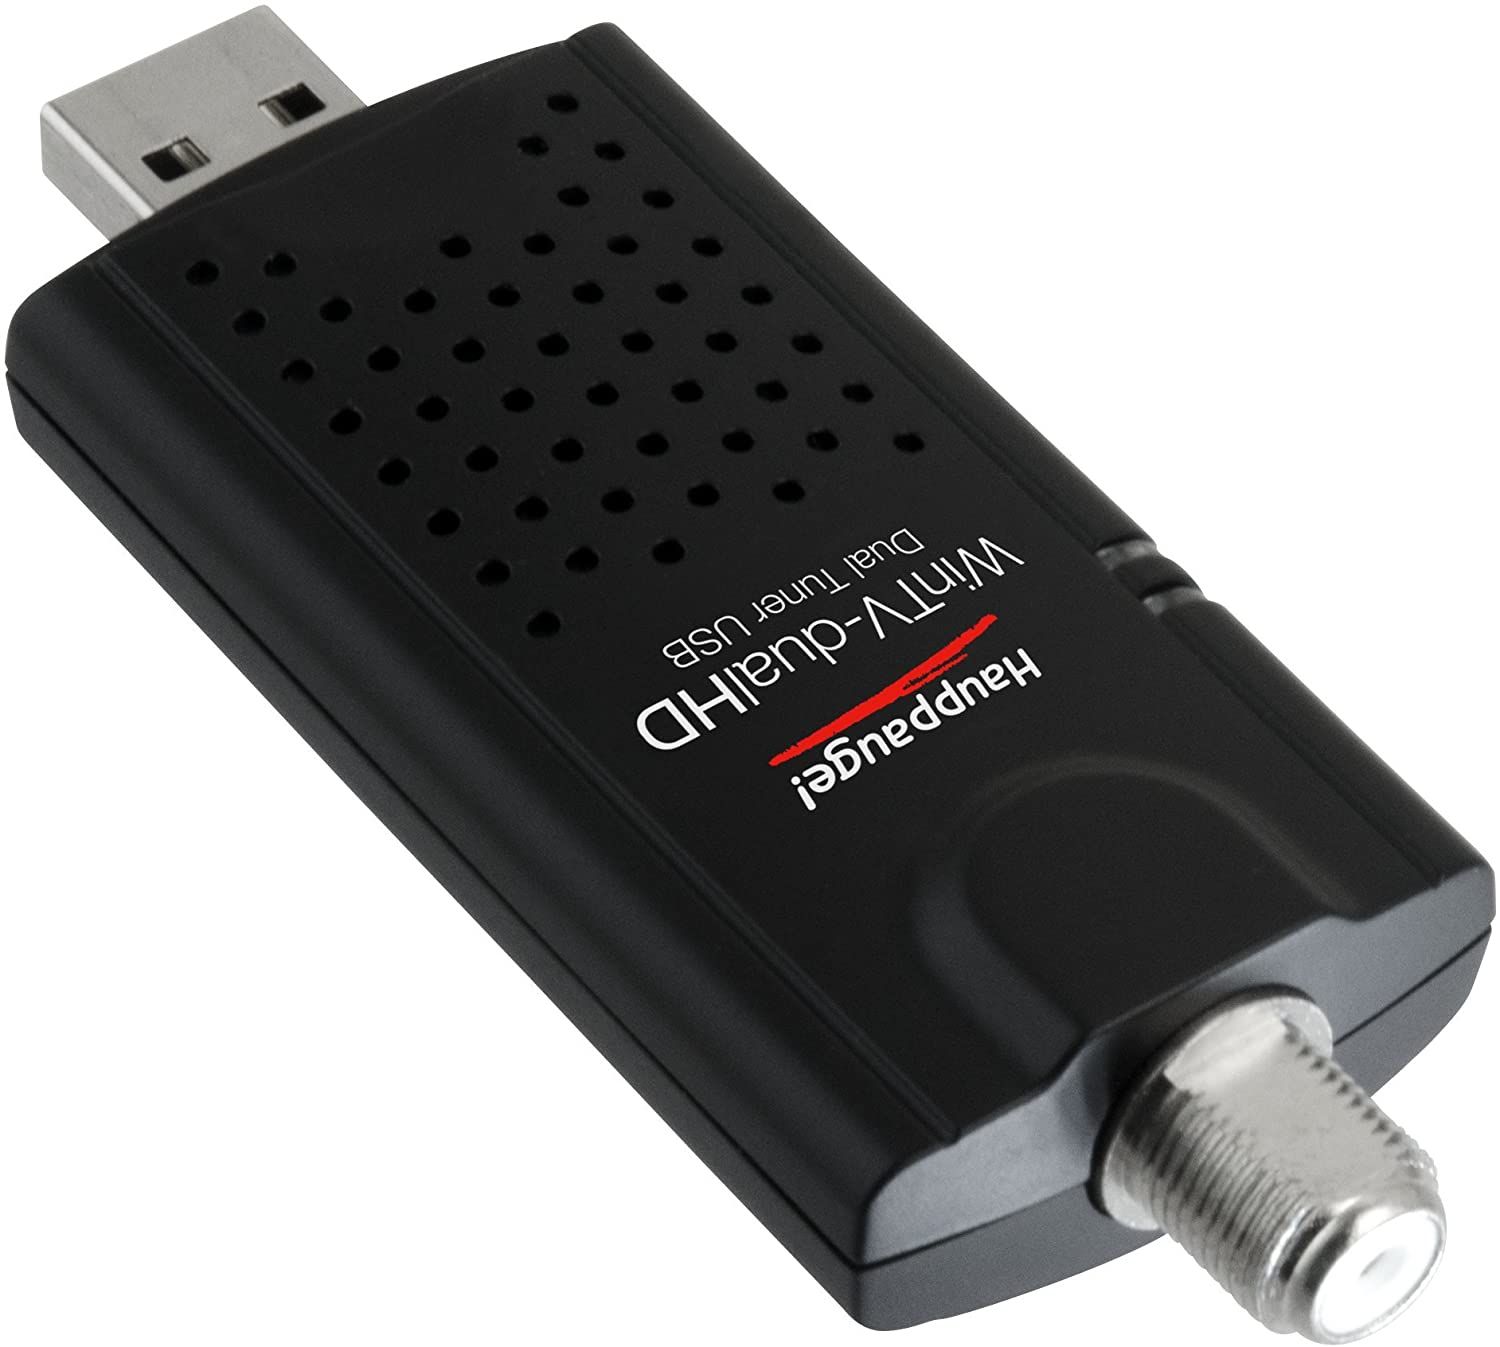 usb tv tuner for pc what is an iso image